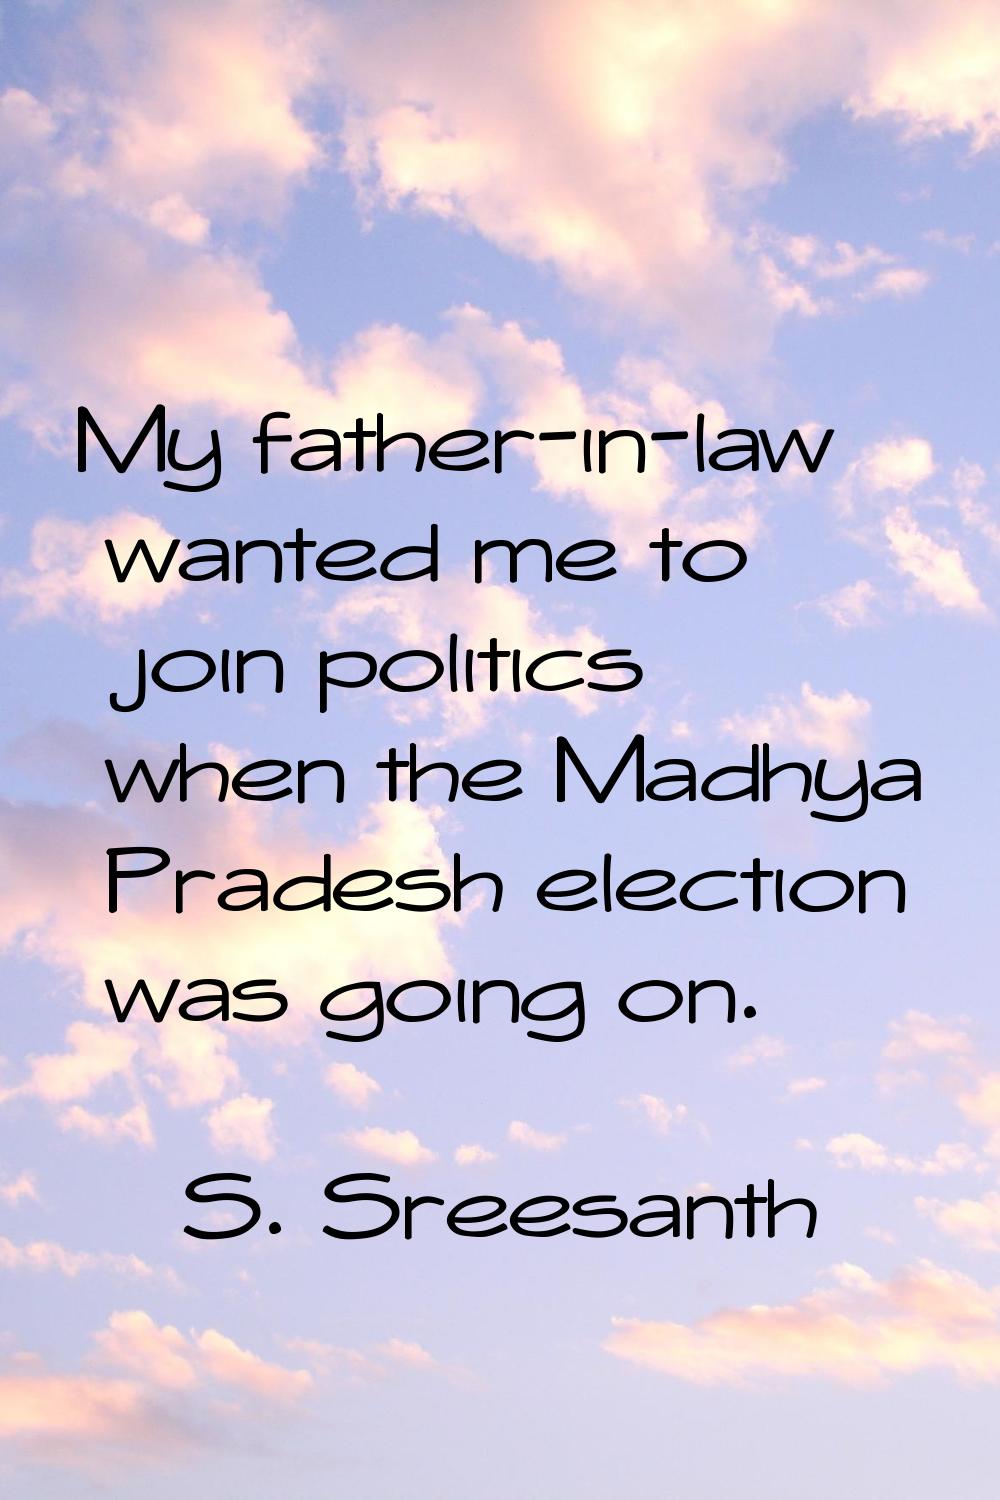 My father-in-law wanted me to join politics when the Madhya Pradesh election was going on.